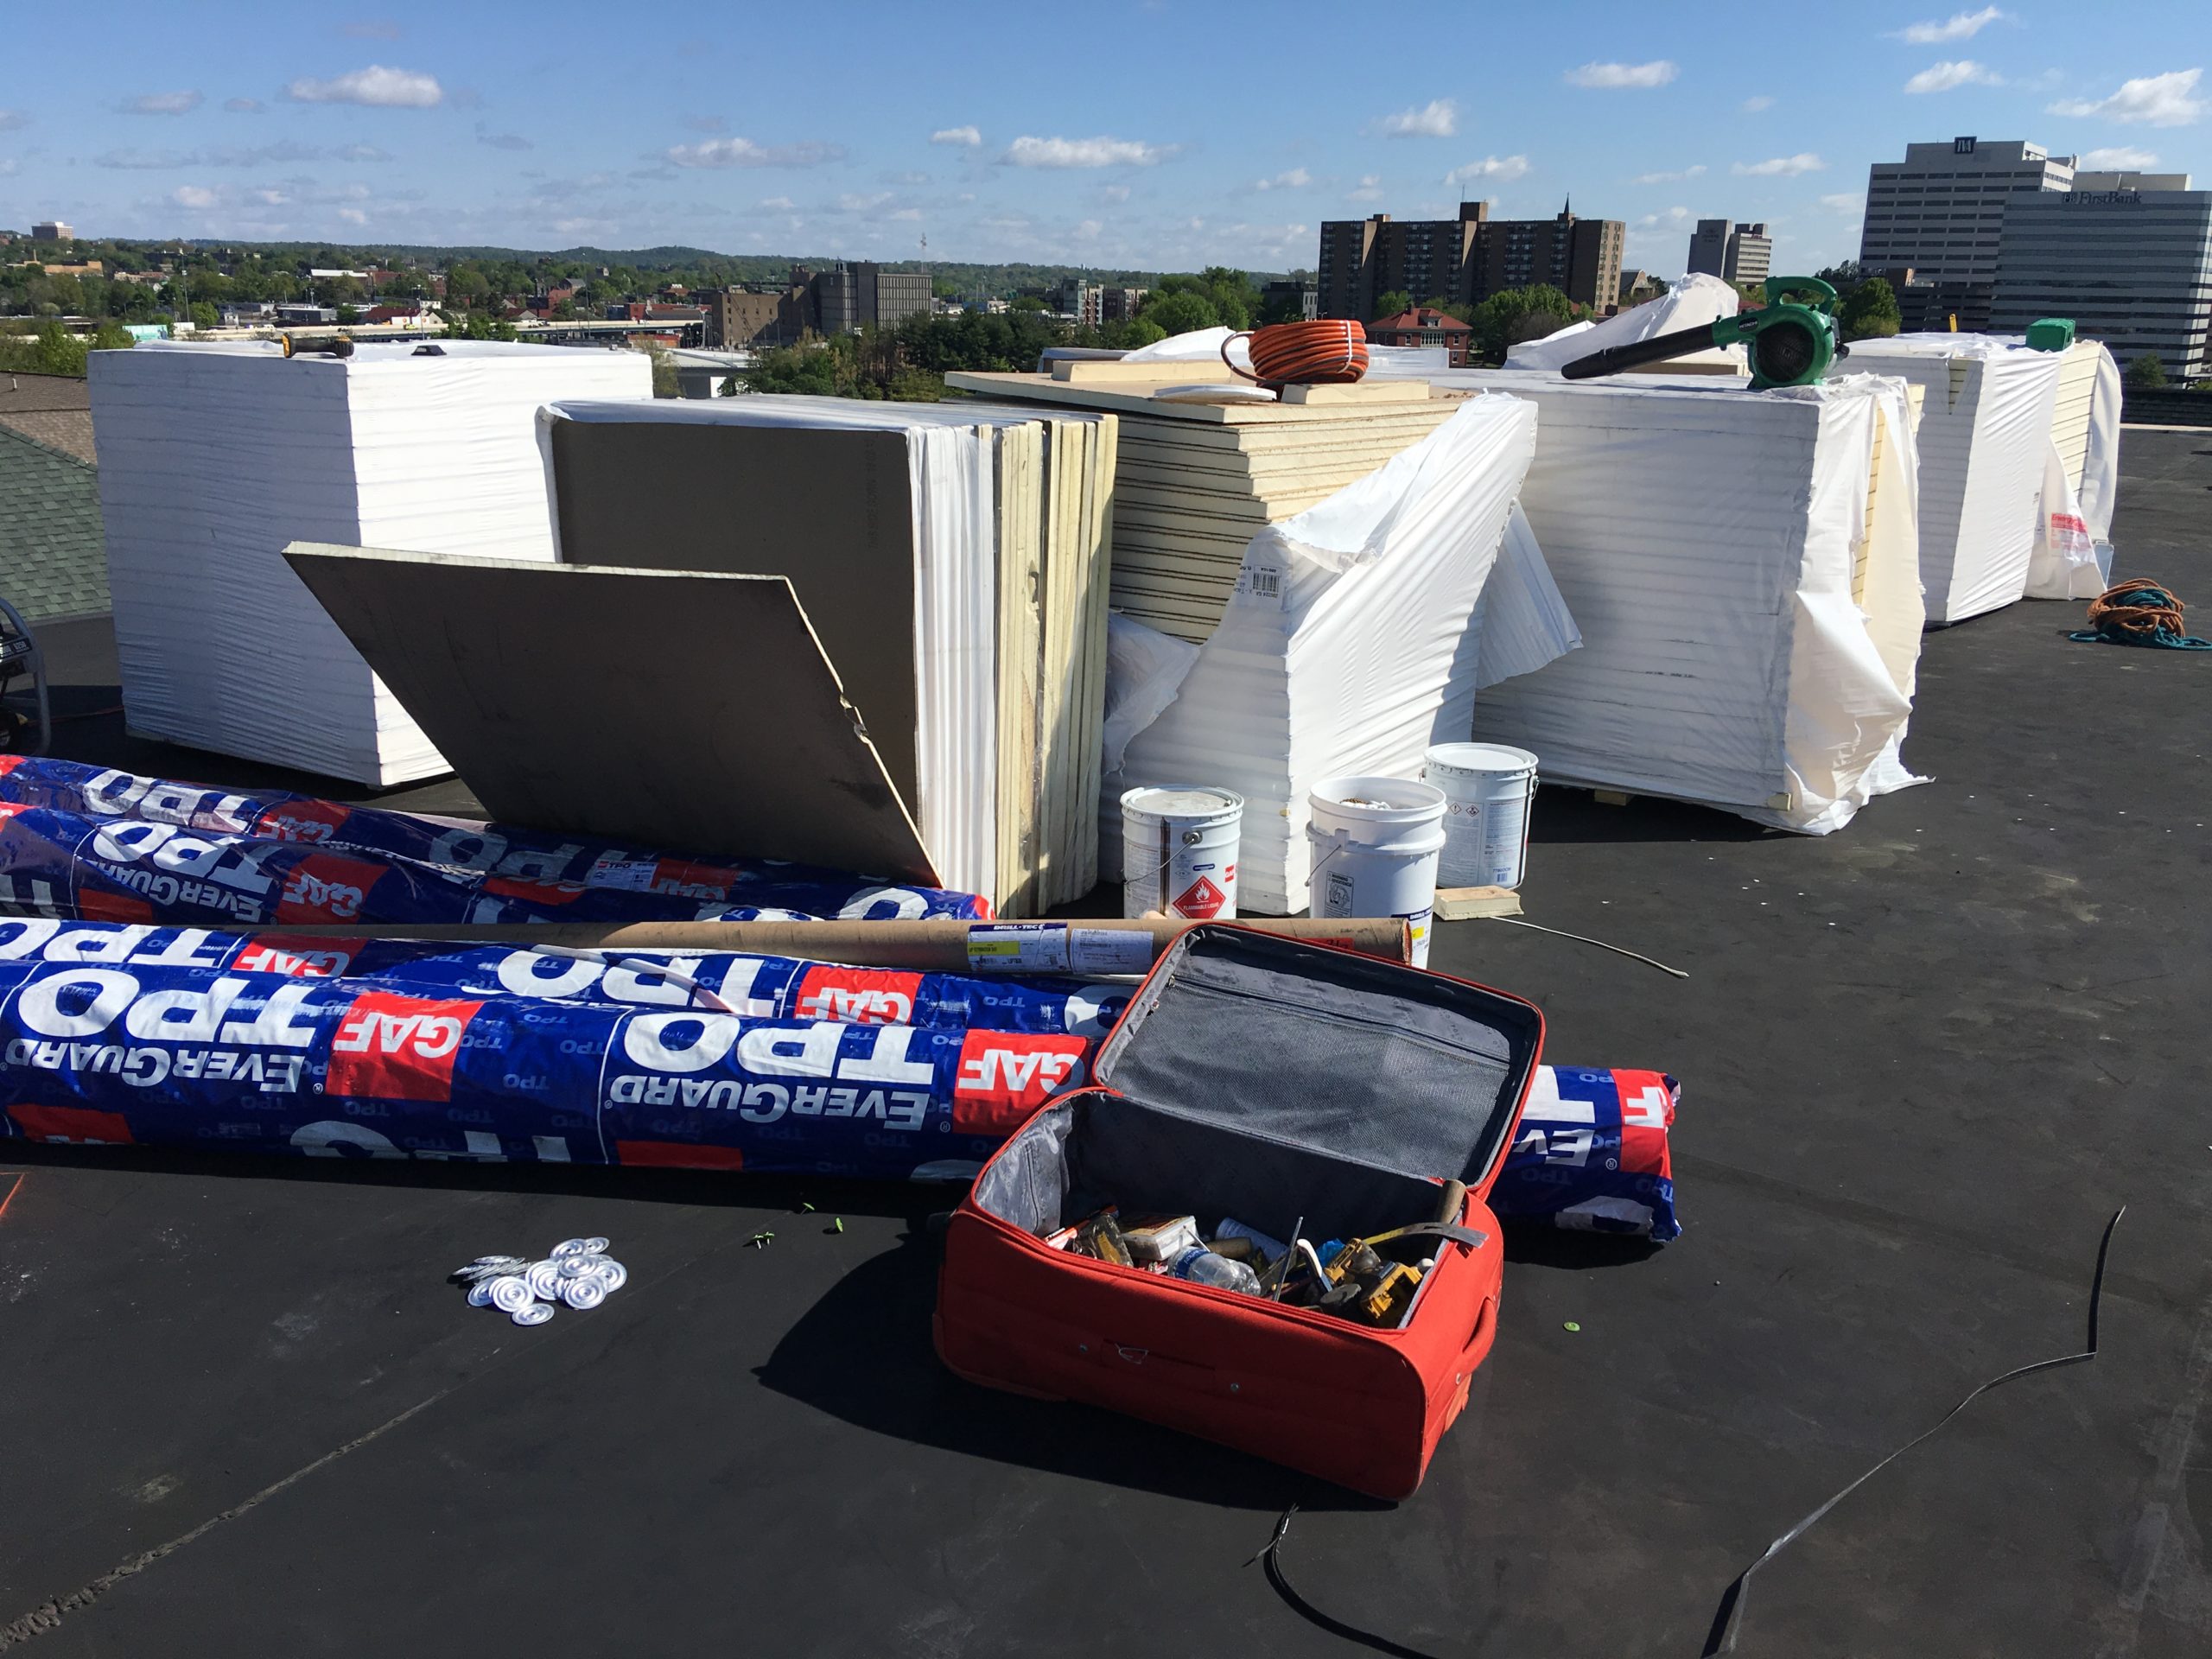 This is a view of the materials loaded on the roof ready for install.